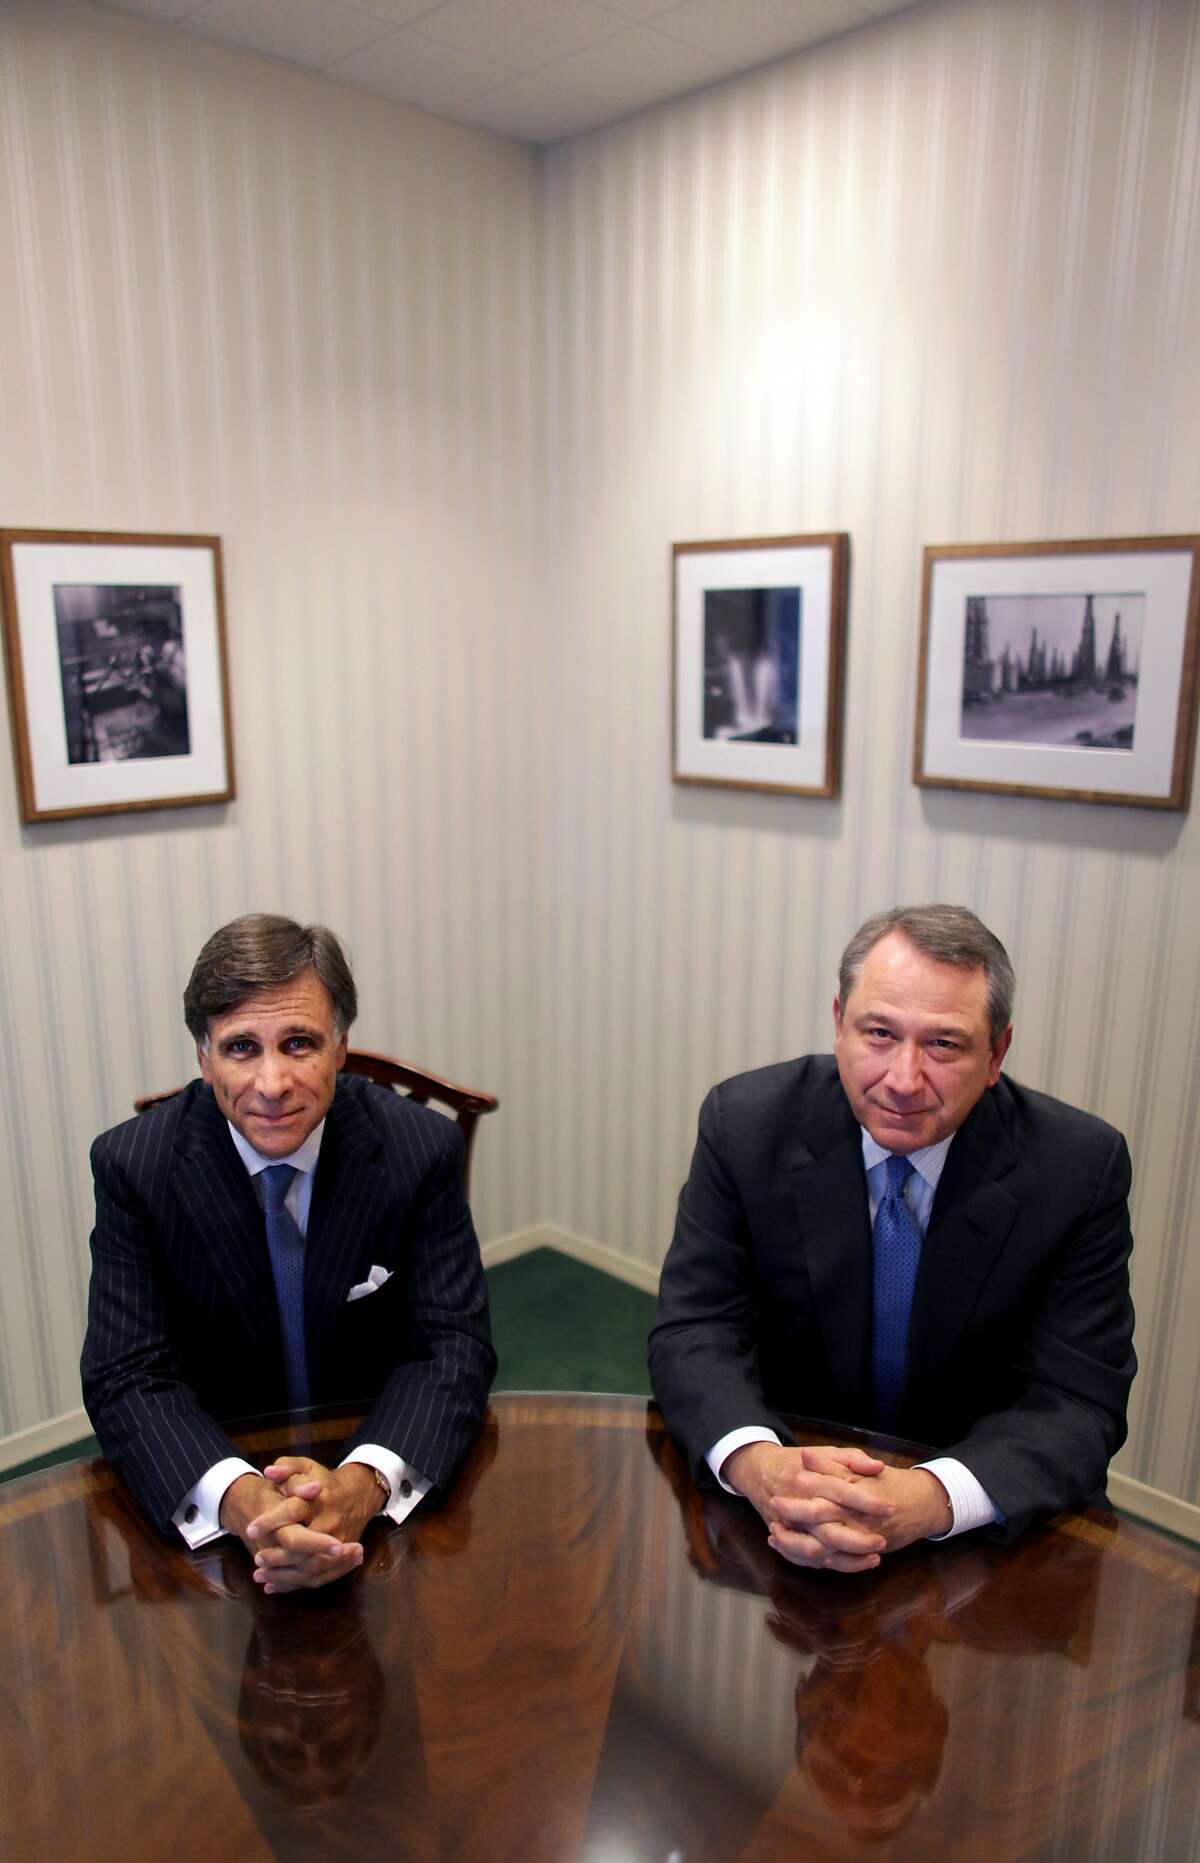 Evan Chesler, left, and Allen Parker, partners at the law firm Cravath, Swaine & Moore, in New York, Sept. 13, 2012. Faced with risk-taking peers and an uncertain economy, a handful of prestigious law firms, including Cravath, stick with partnership-driven philosophies that emphasize teamwork and a strict lock-step compensation system.